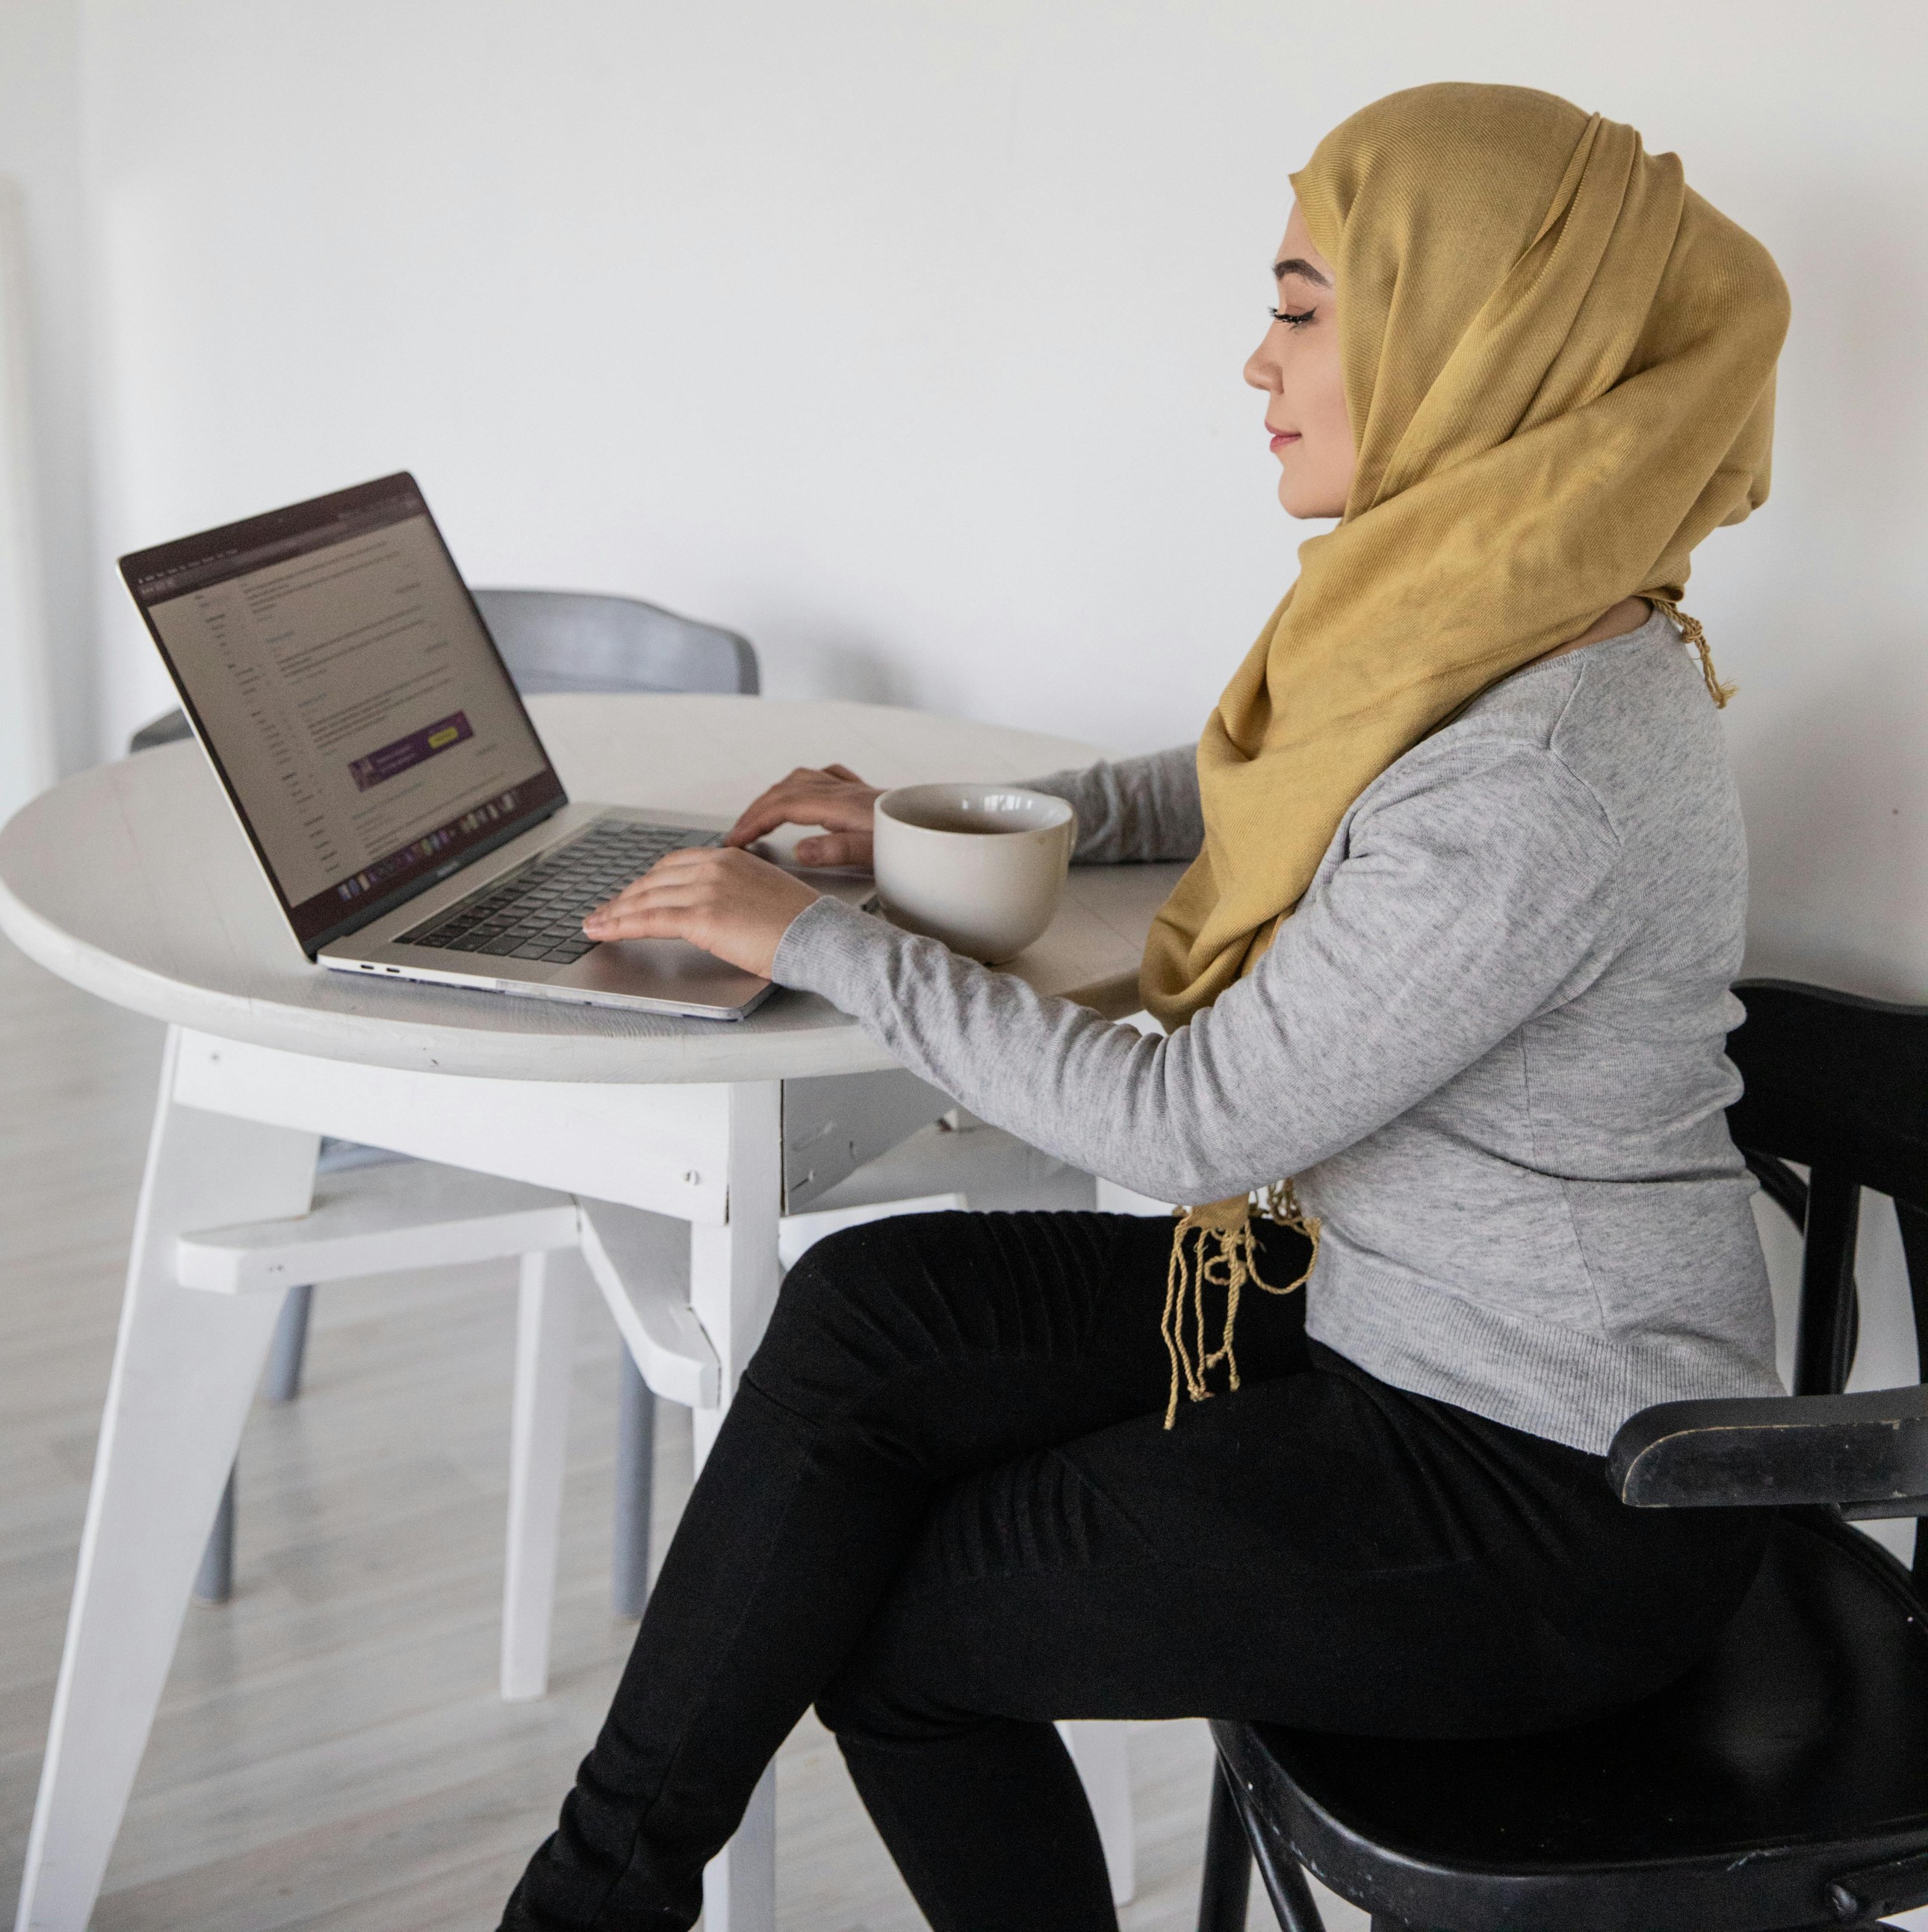 Woman in headscarf working on computer